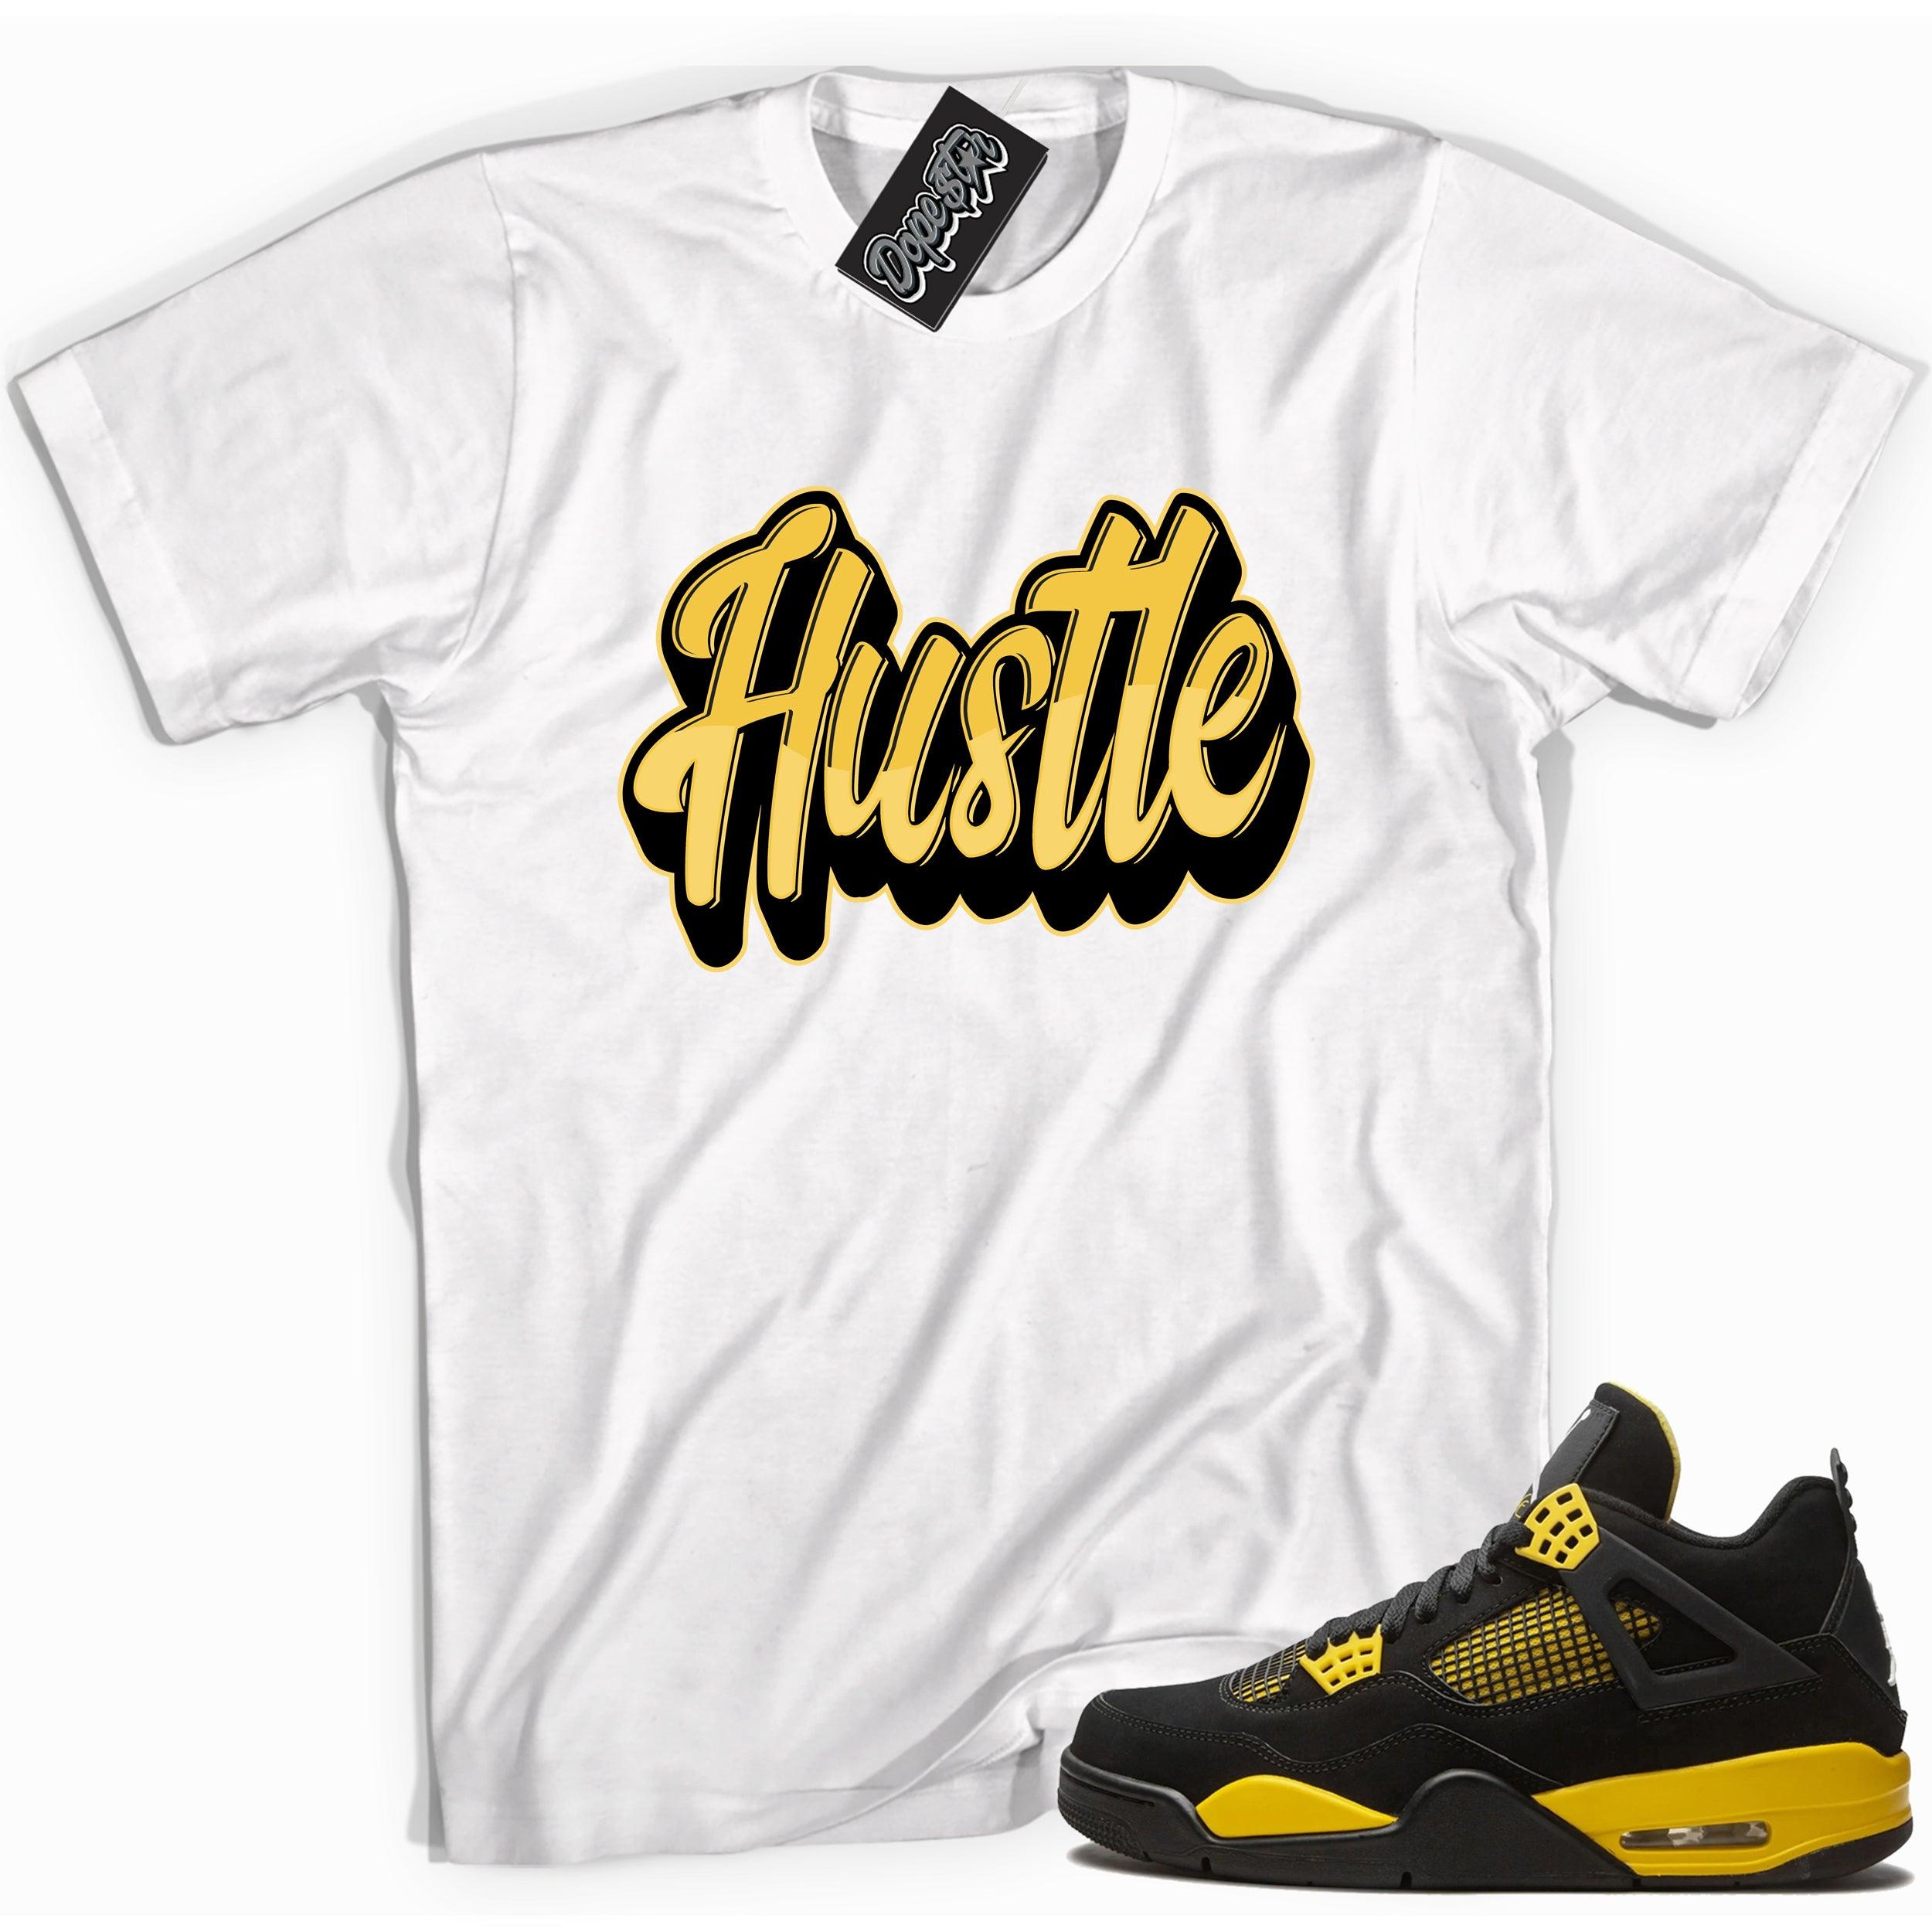 Cool white graphic tee with 'hustle' print, that perfectly matches Air Jordan 4 Thunder sneakers